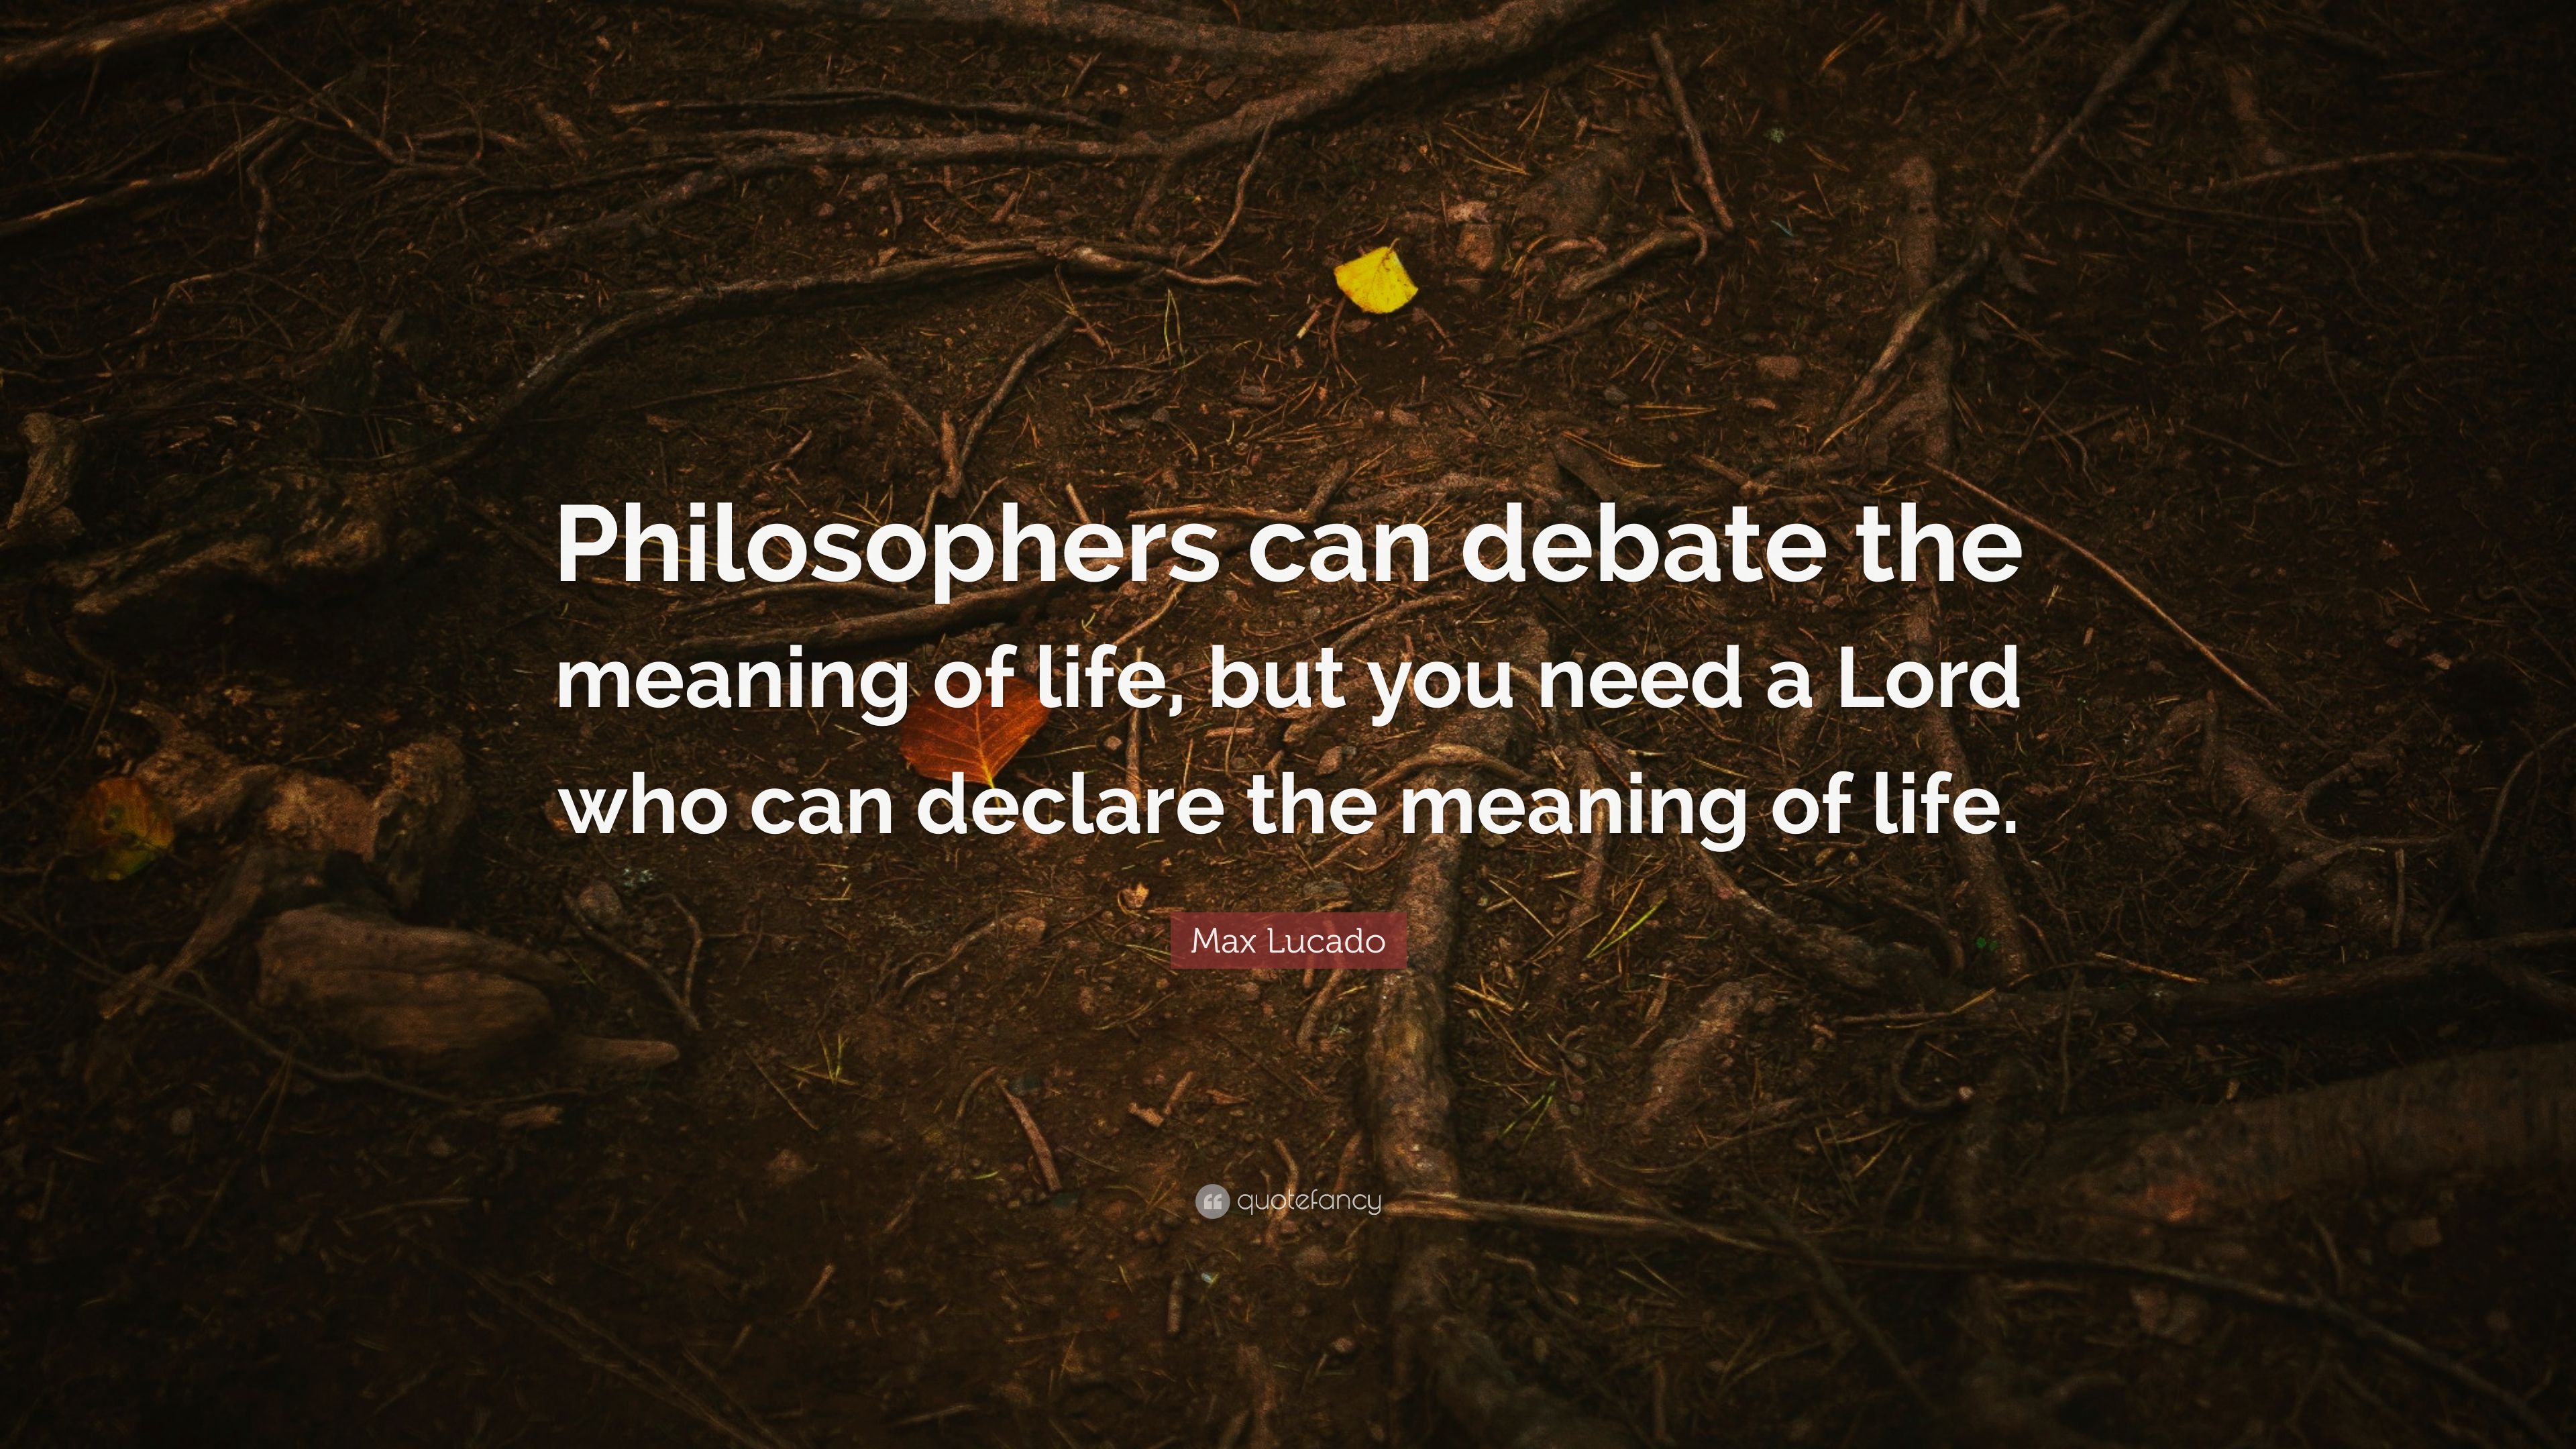 Max Lucado Quote: “Philosophers can debate the meaning of life